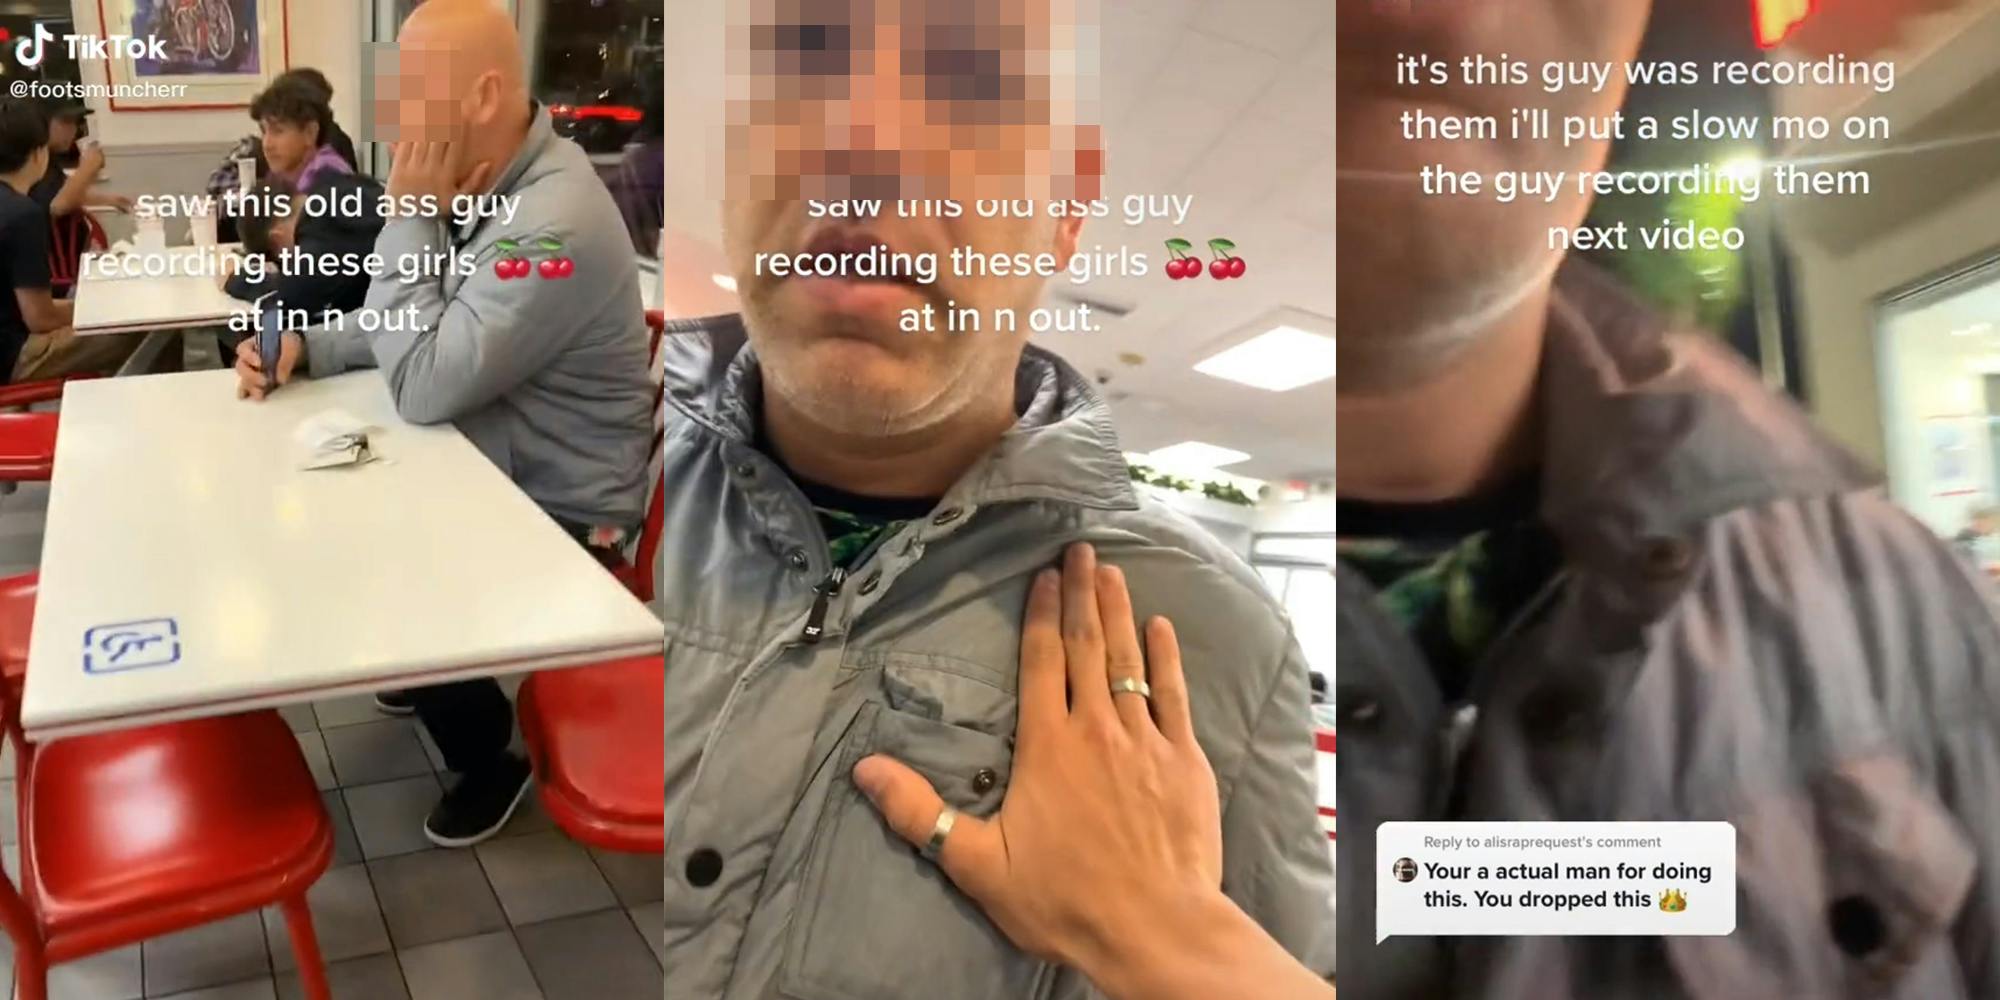 man at table with phone tilted, caption "saw this old ass guy recording these girls at in n out" (l) person placing hand on man's chest (c) close up of man with captions "it's this guy was recording them i'll put a slow mo on the guy recording them next video" and "Your a actual man for doing this. You dropped this 'crown emoji'" (r)